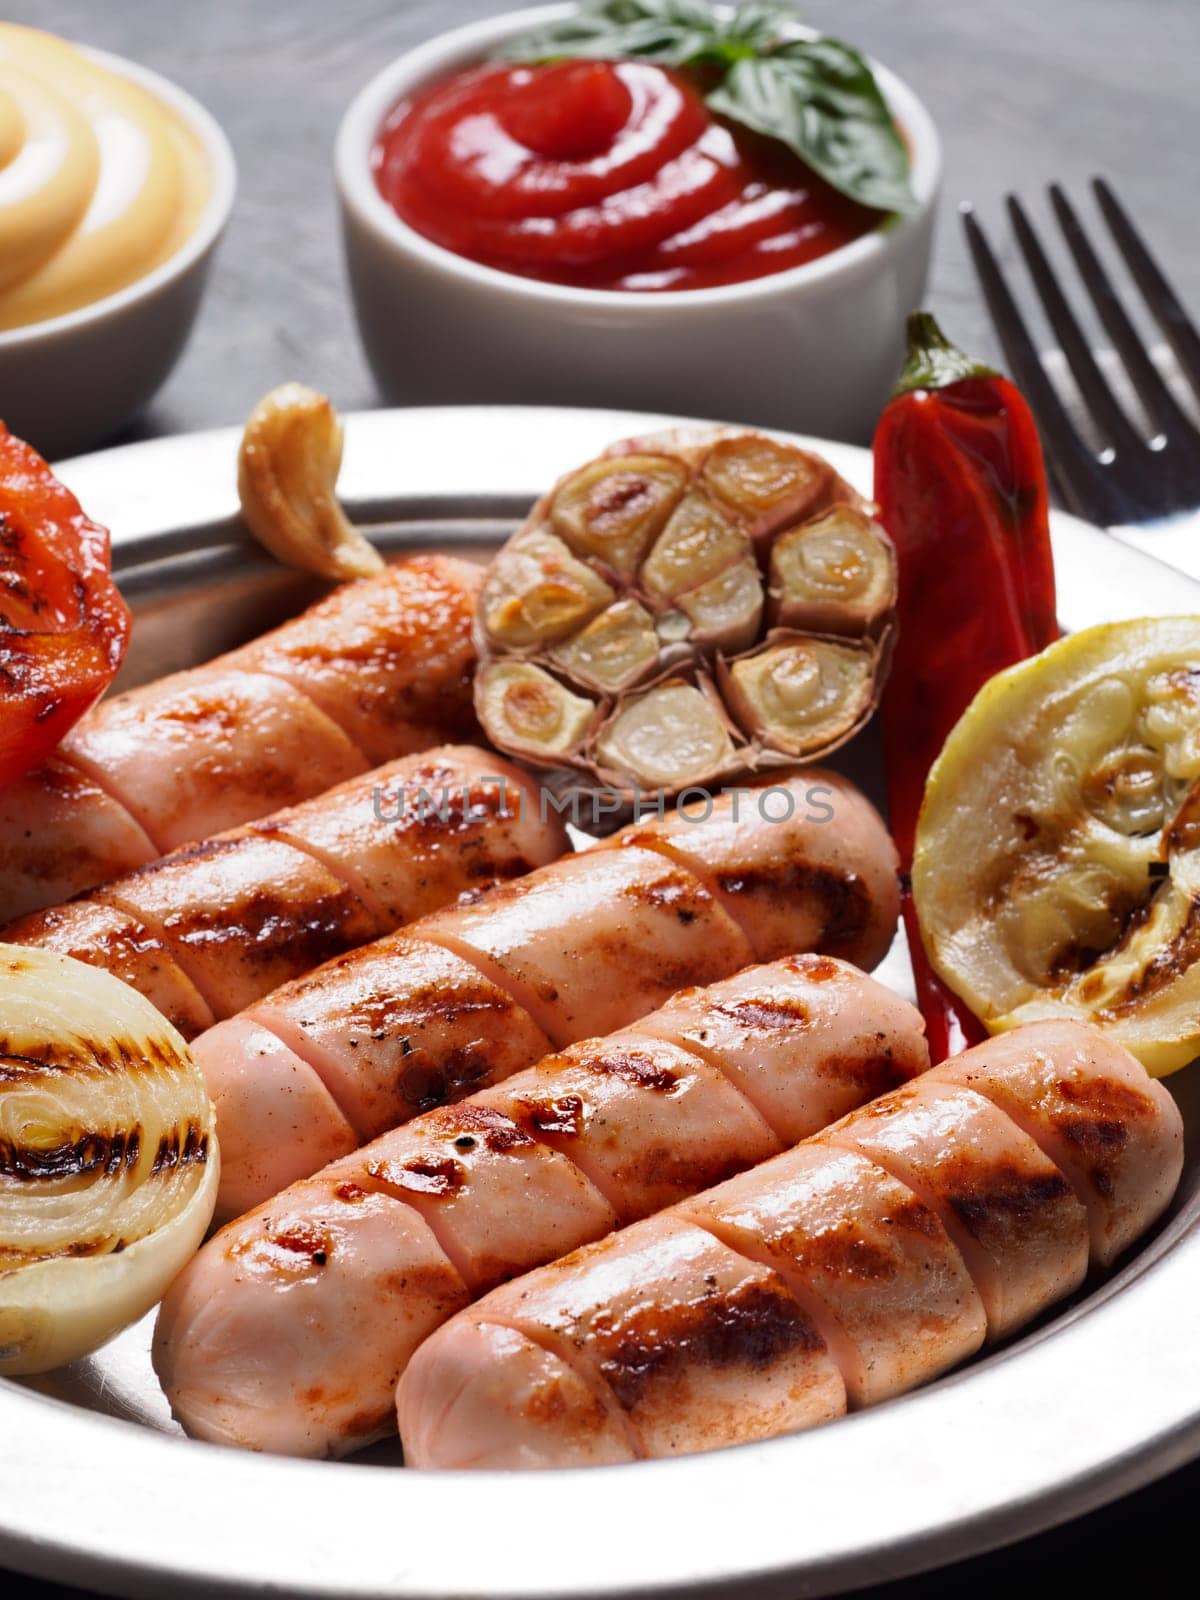 Chicken homemade sausages with sauces ketchup and mustard on black background. Grilled sausages and grilled vegetables in metal plate. Copy space. Vertical.